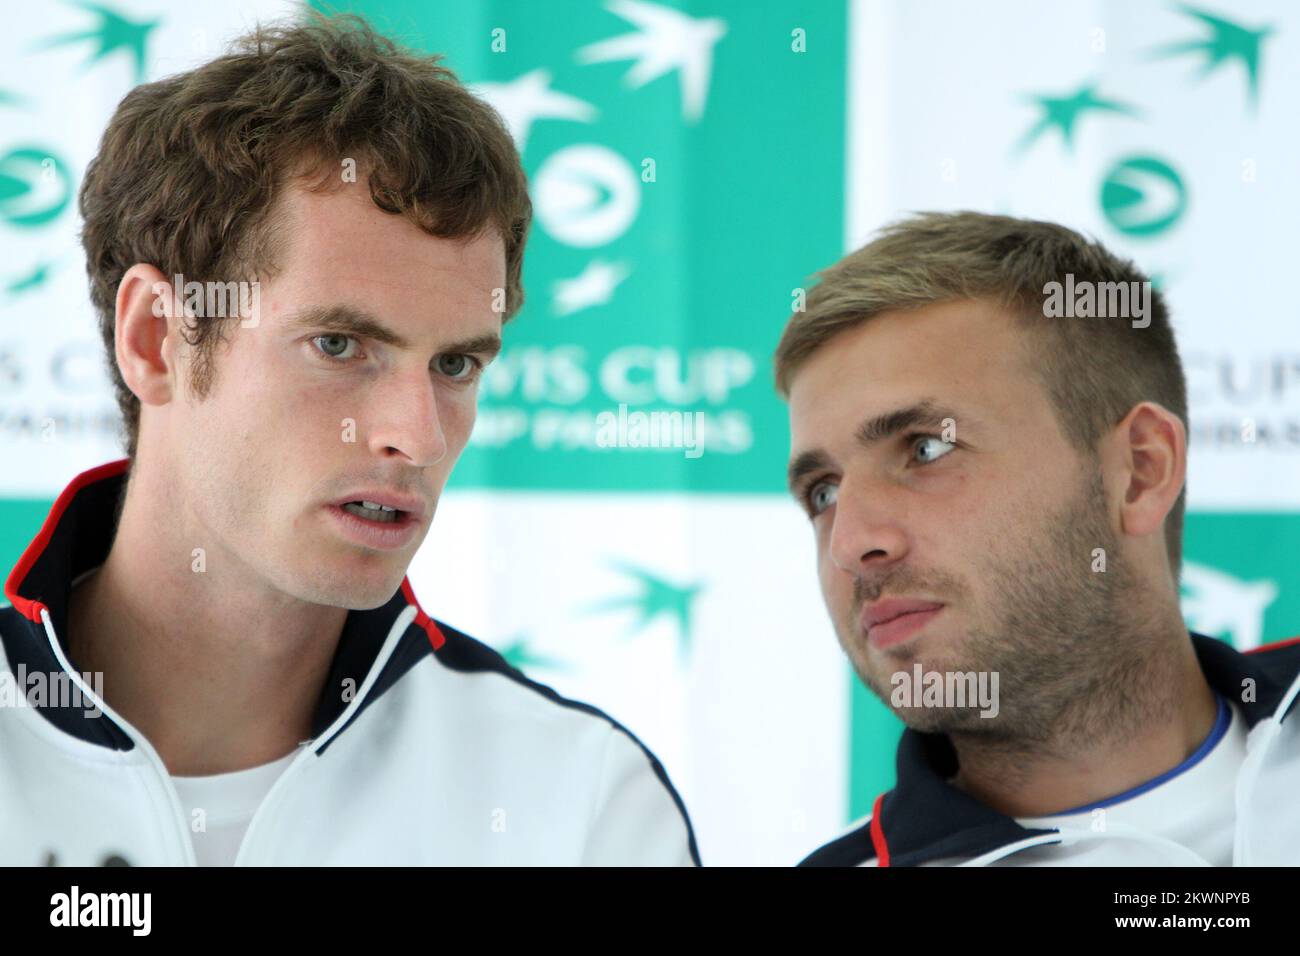 11.09.2013. Croatia, Umag - Press conference of British tennis team ahead of Davis Cup which is due to bad weather delayed more than an hour. Andy Murray, Dave Evans   Photo: Nel Pavletic/PIXSELL Stock Photo